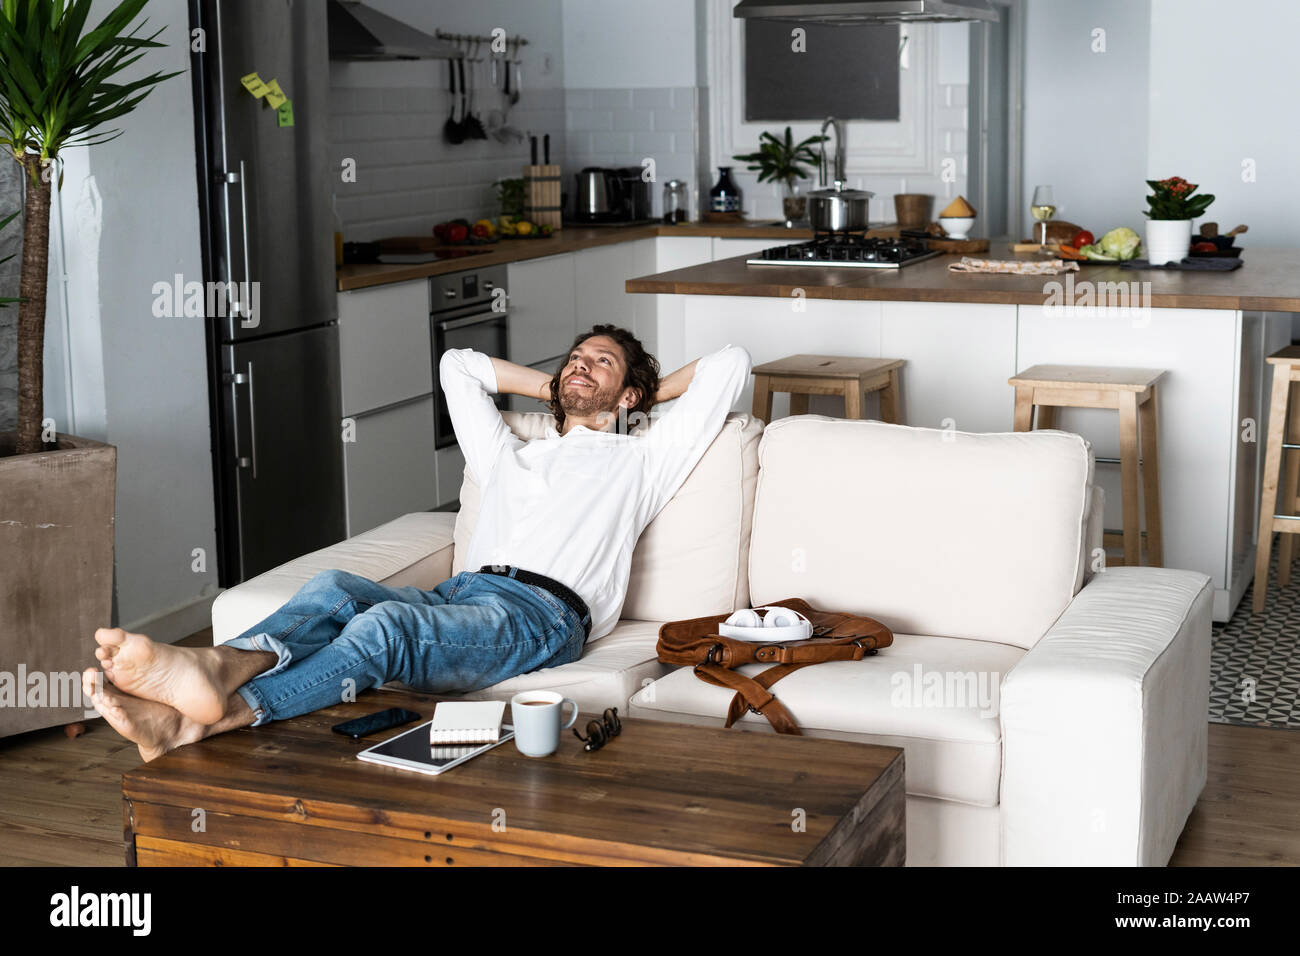 Relaxed man leaning back on couch at home Stock Photo